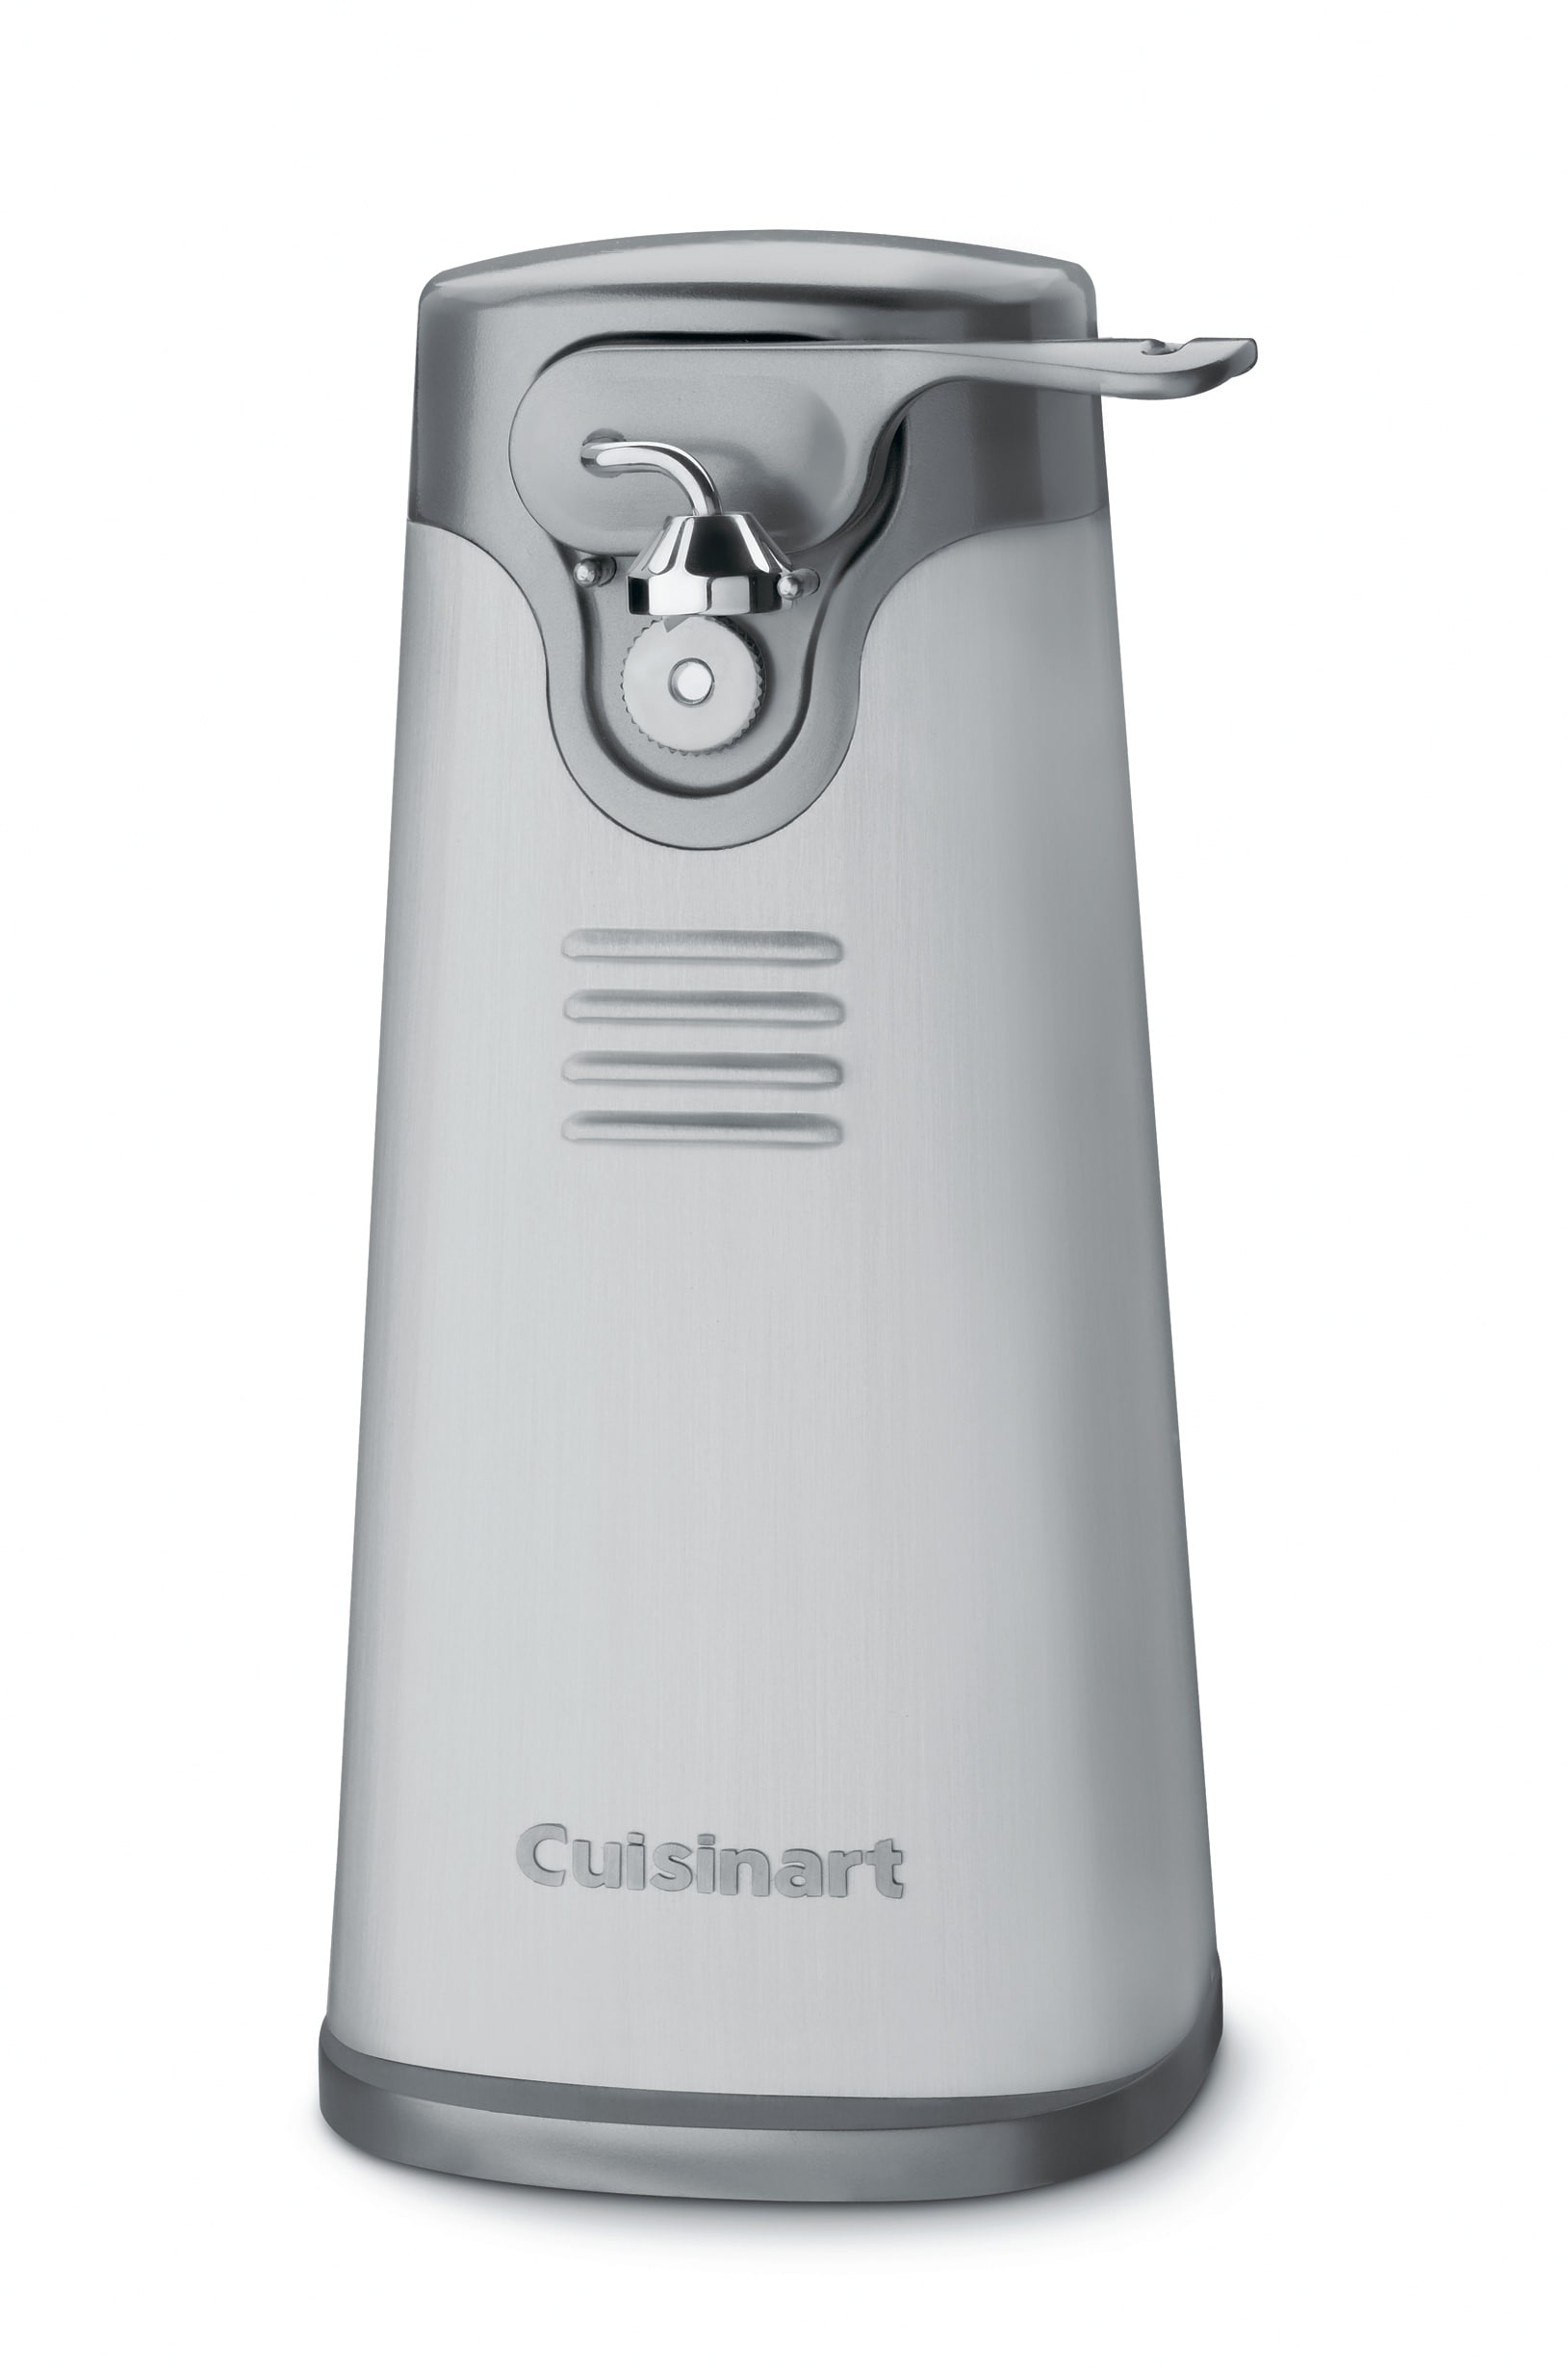 Cuisinart Stainless Steel Countertop Can Opener at